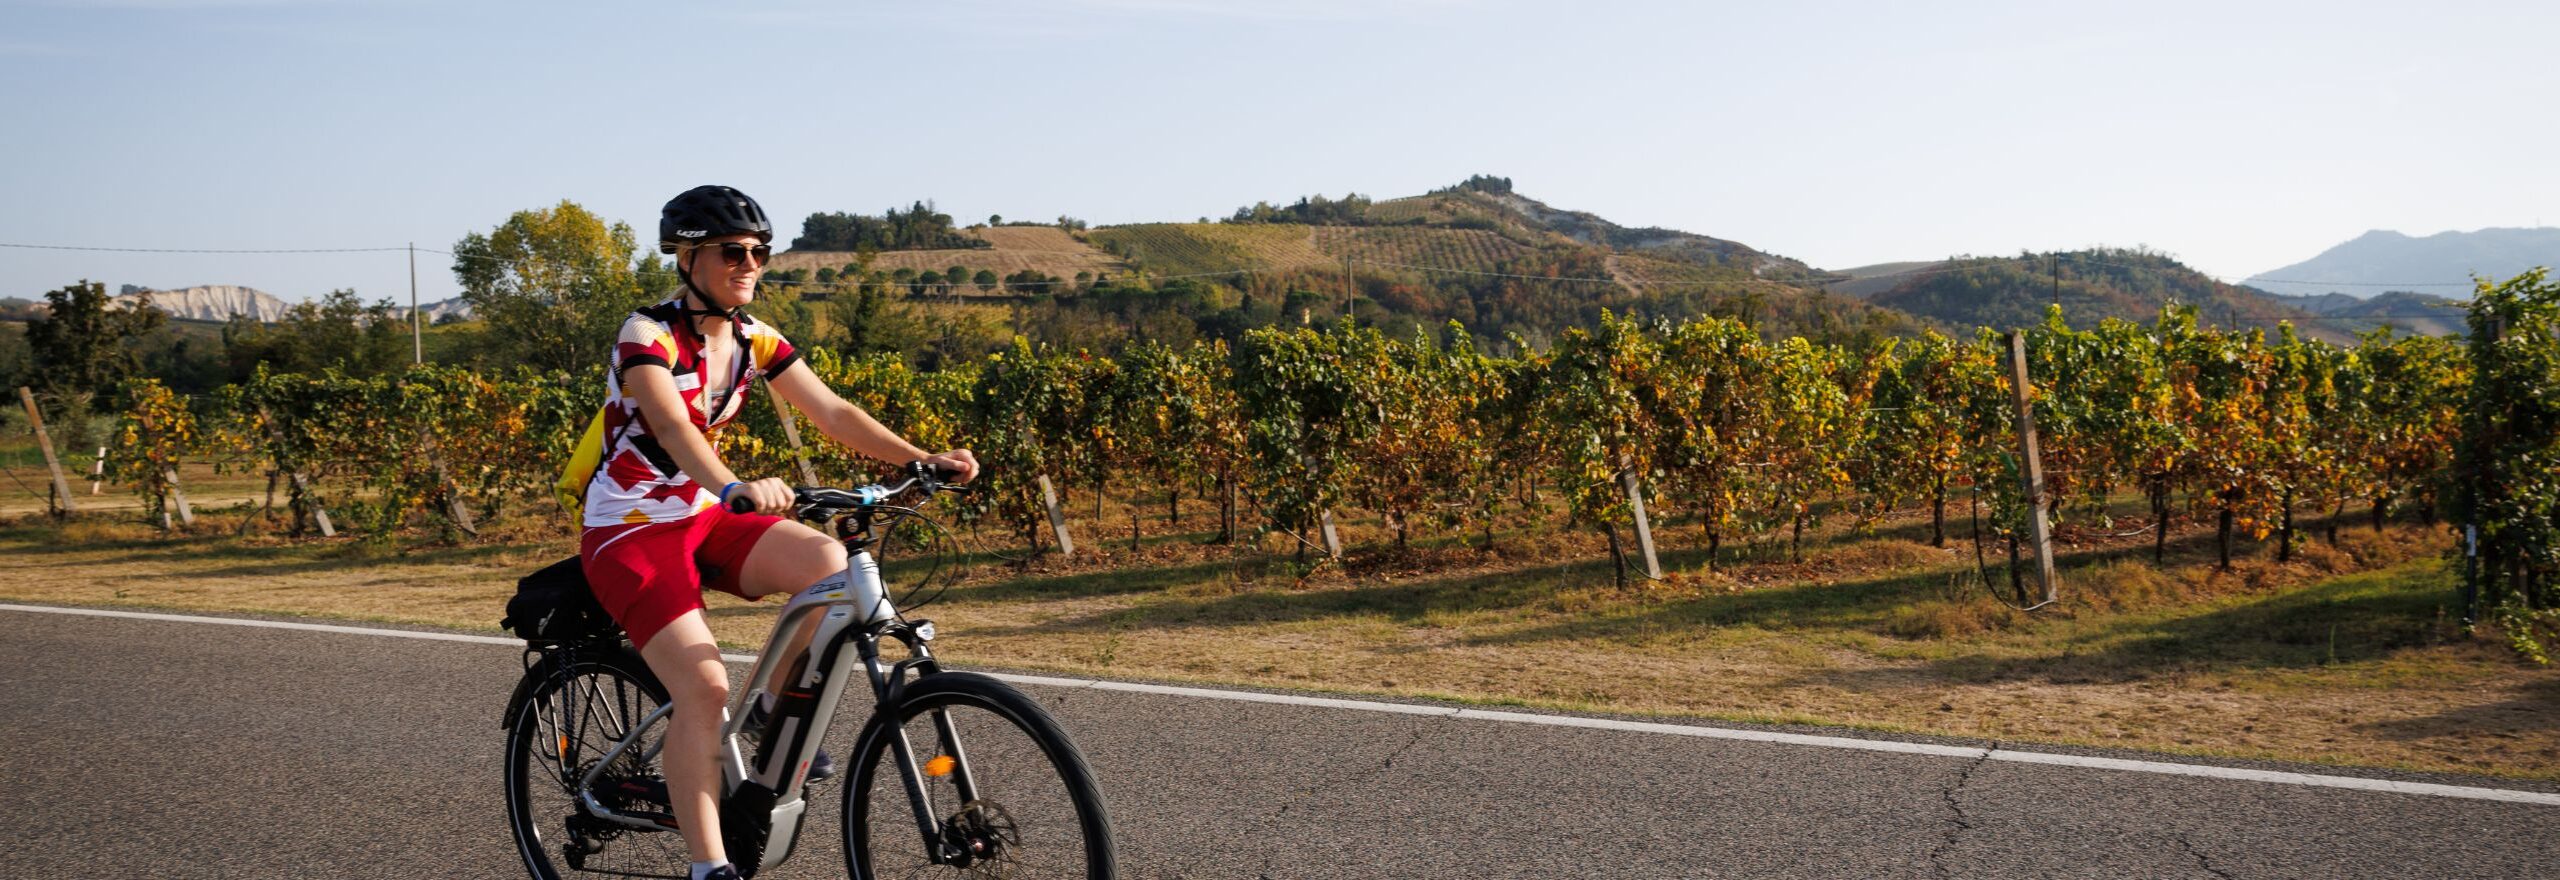 Cycling through the vineyards on a self-guided cycling tour in Italy.